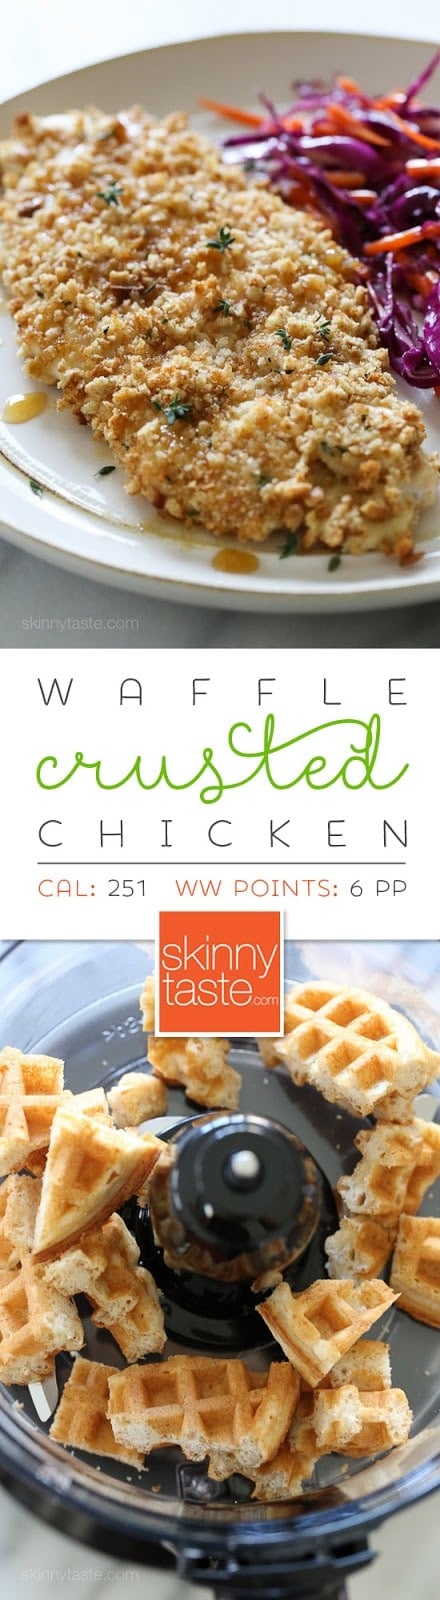 Waffle Crusted Chicken with Spicy Maple Sauce – a healthier twist on chicken and waffles!